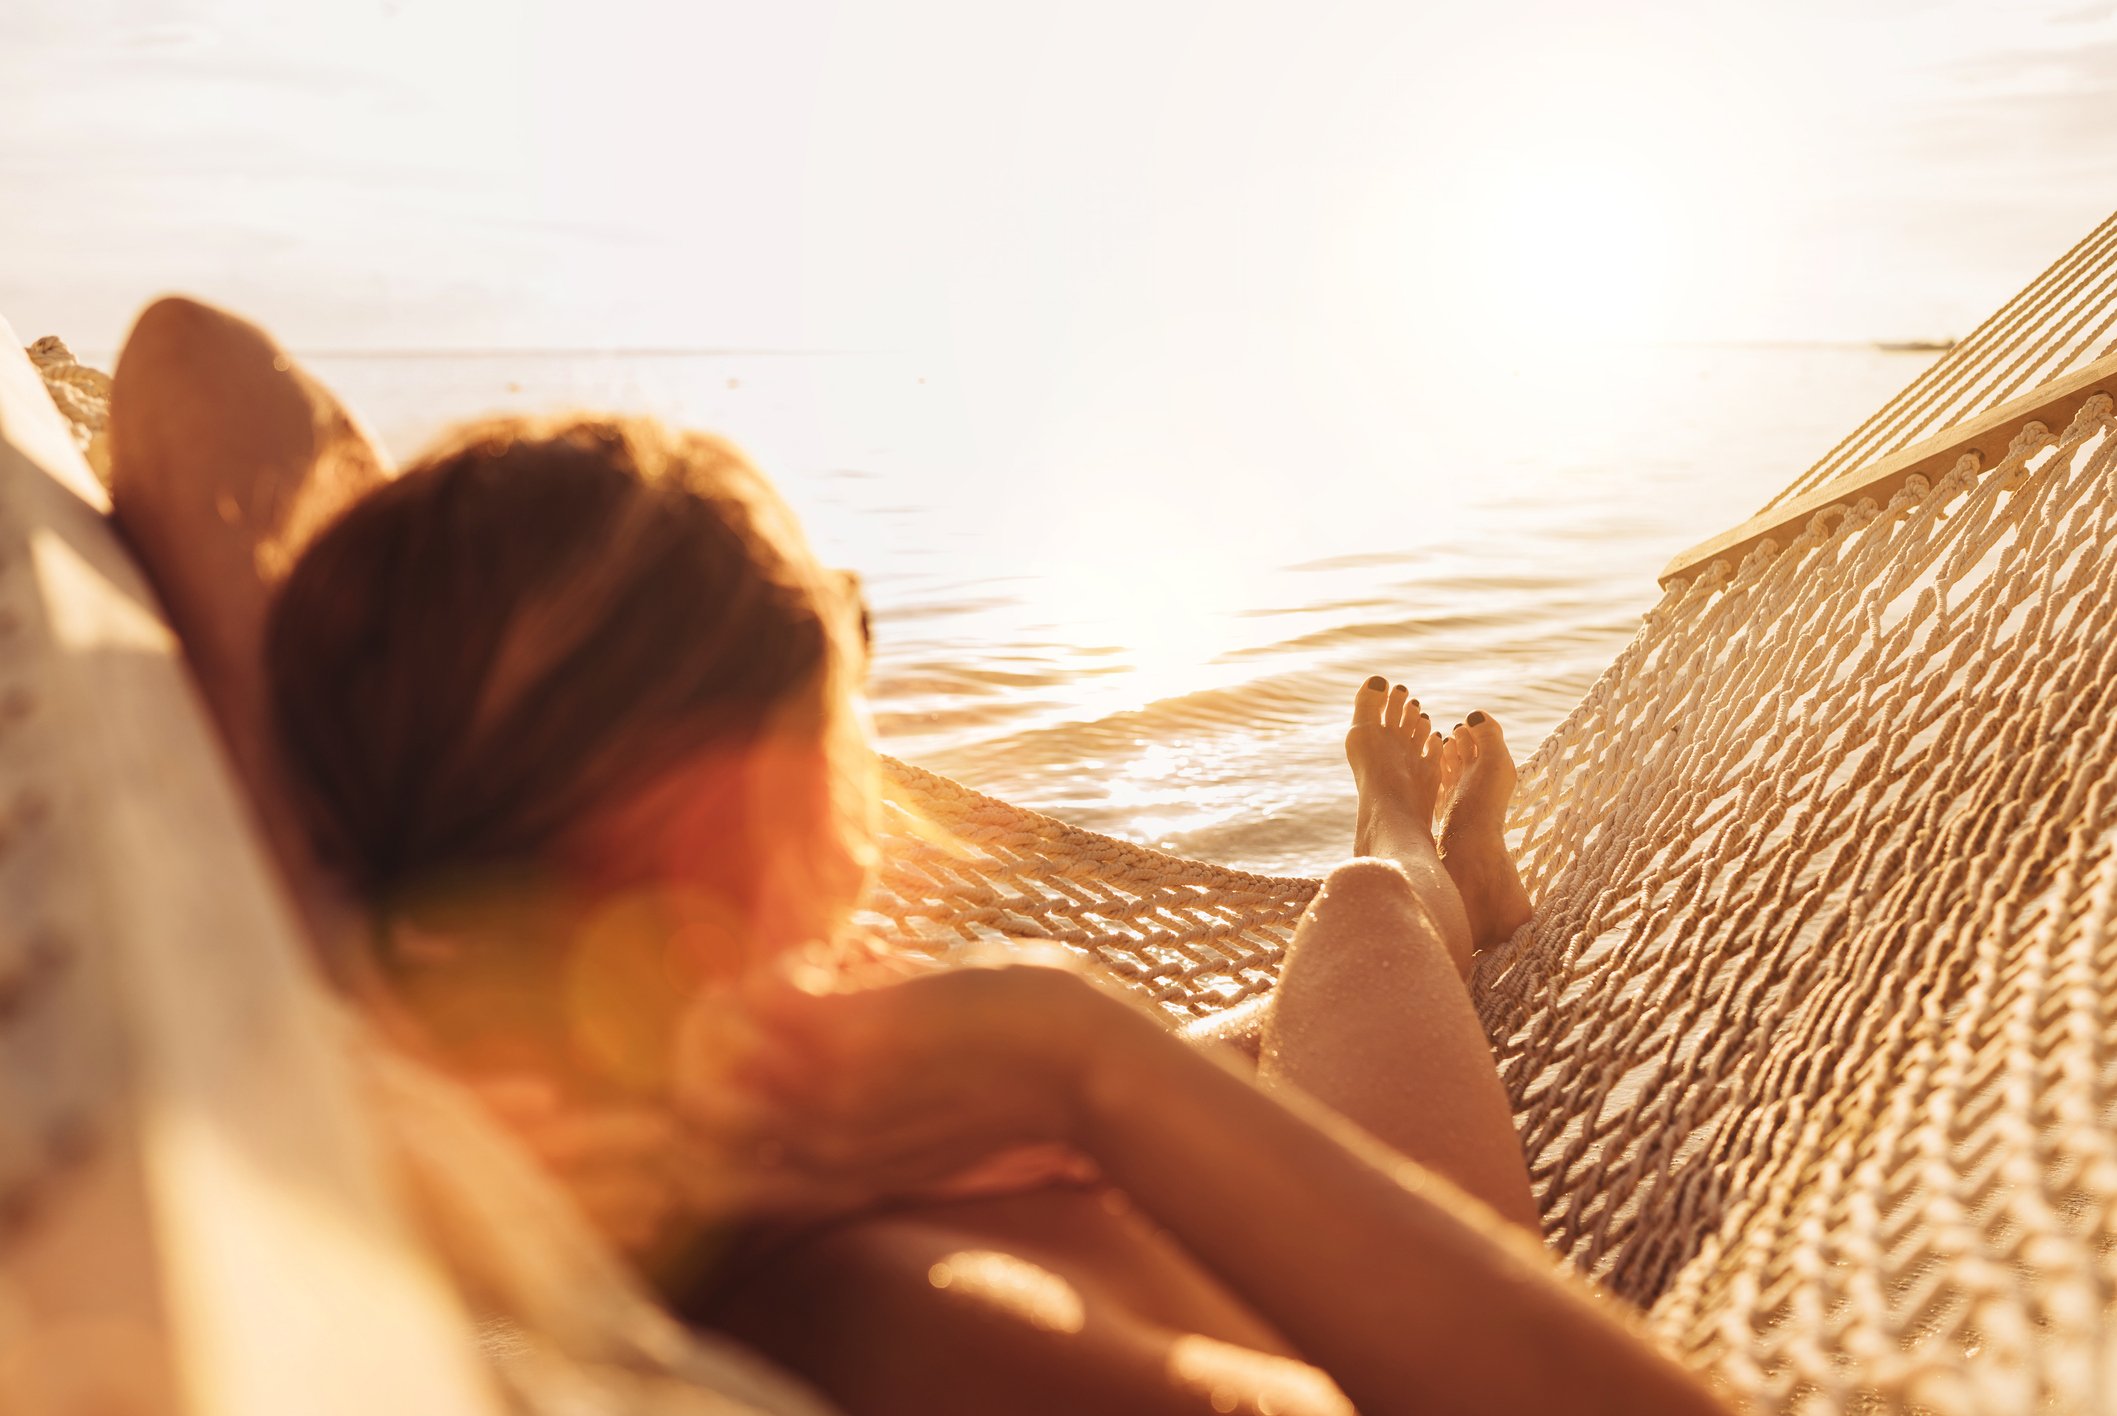 Young woman relaxing in wicker hammock on the sandy beach on Mauritius coast and enjoying sunset light over Indian ocean waves